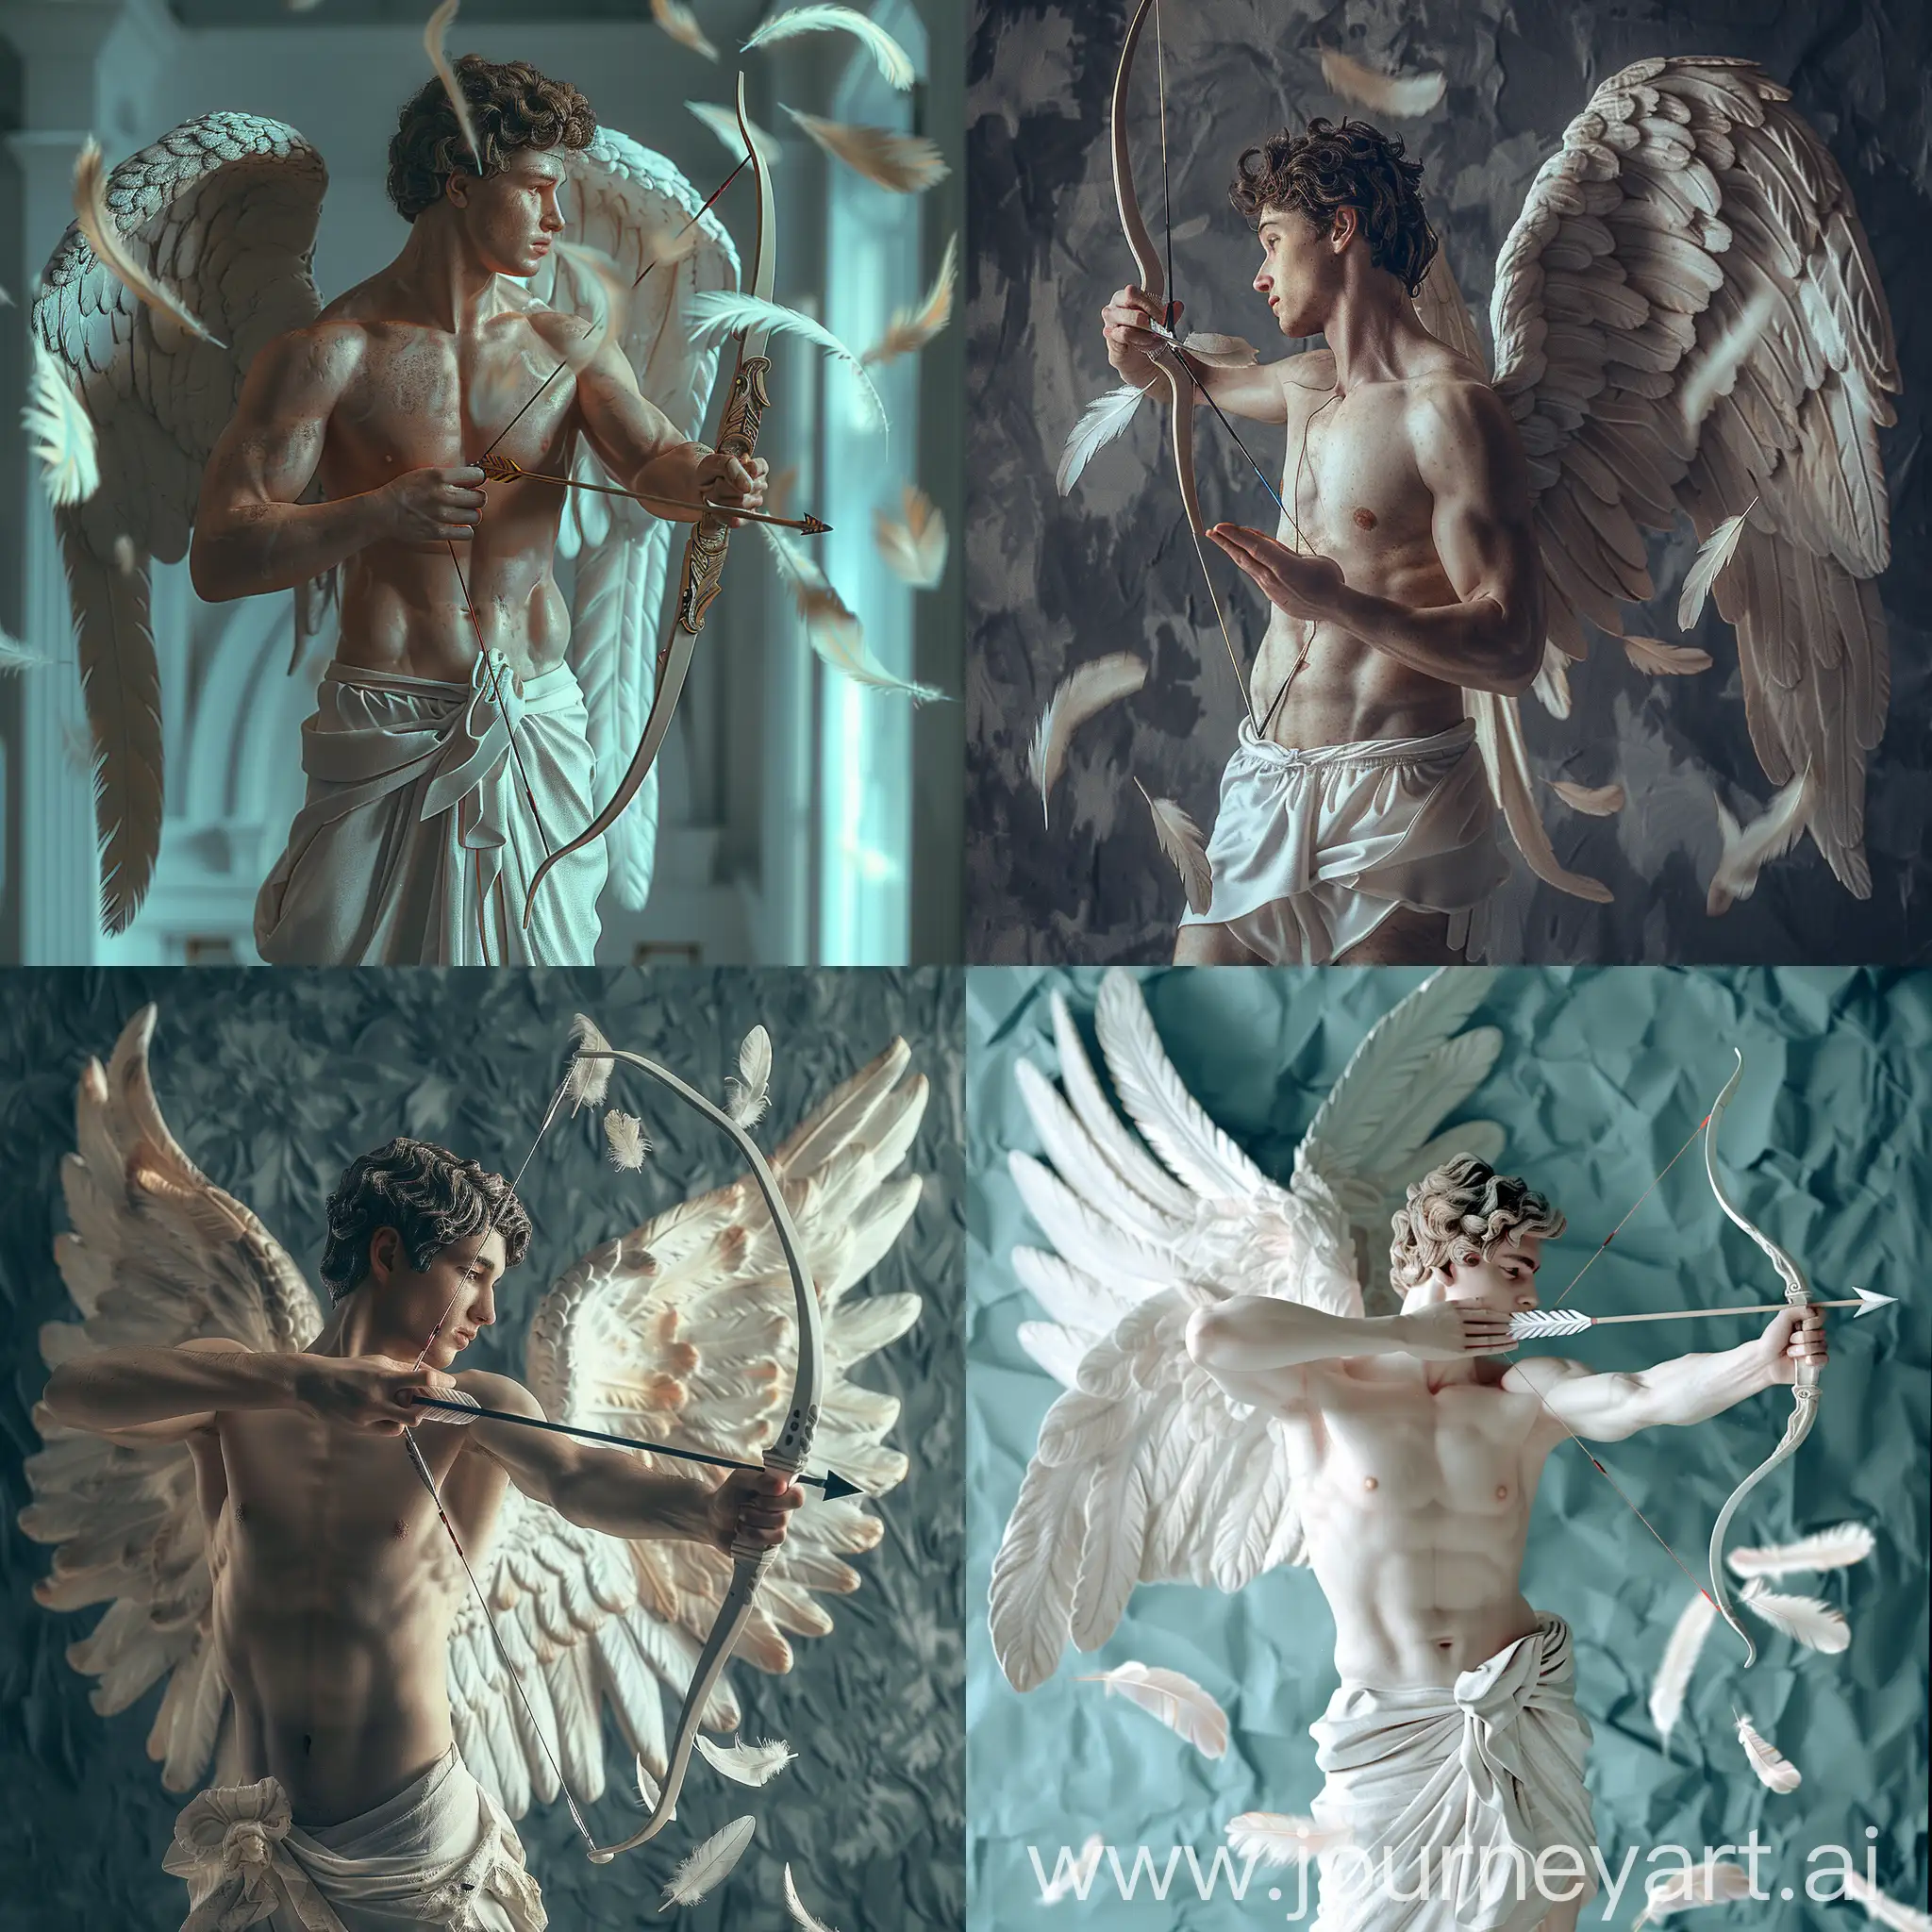 real photo of an angel-guy in the style of an ancient Greek sculpture, holding a bow and arrow in the shape of a heart, feathers falling from white wings, sleep paralysis, color photo